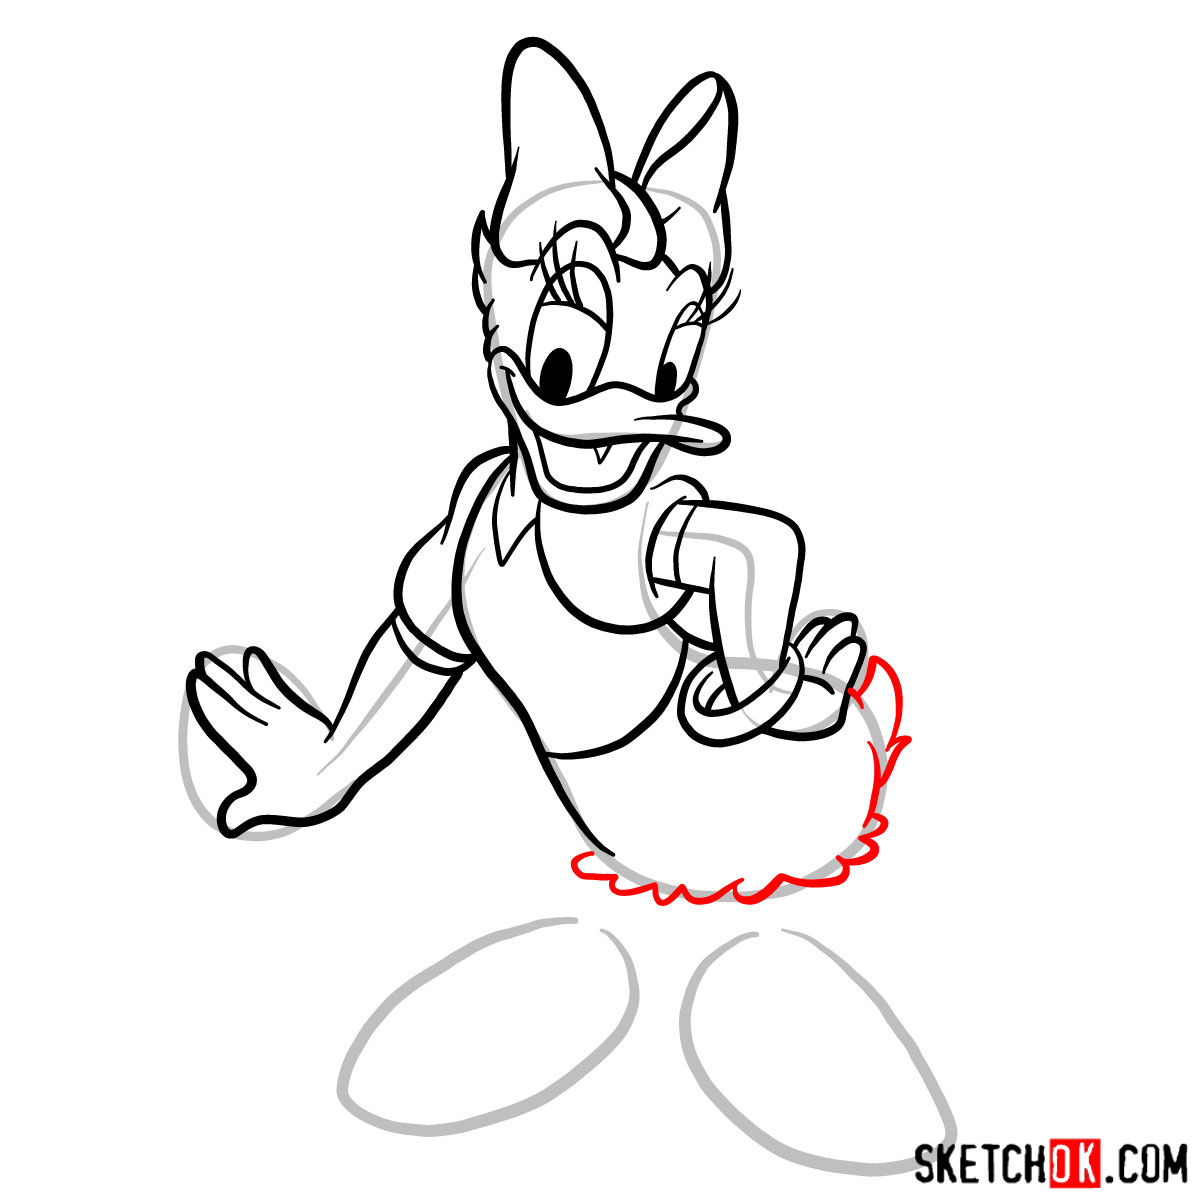 How to draw Daisy Duck - step 10